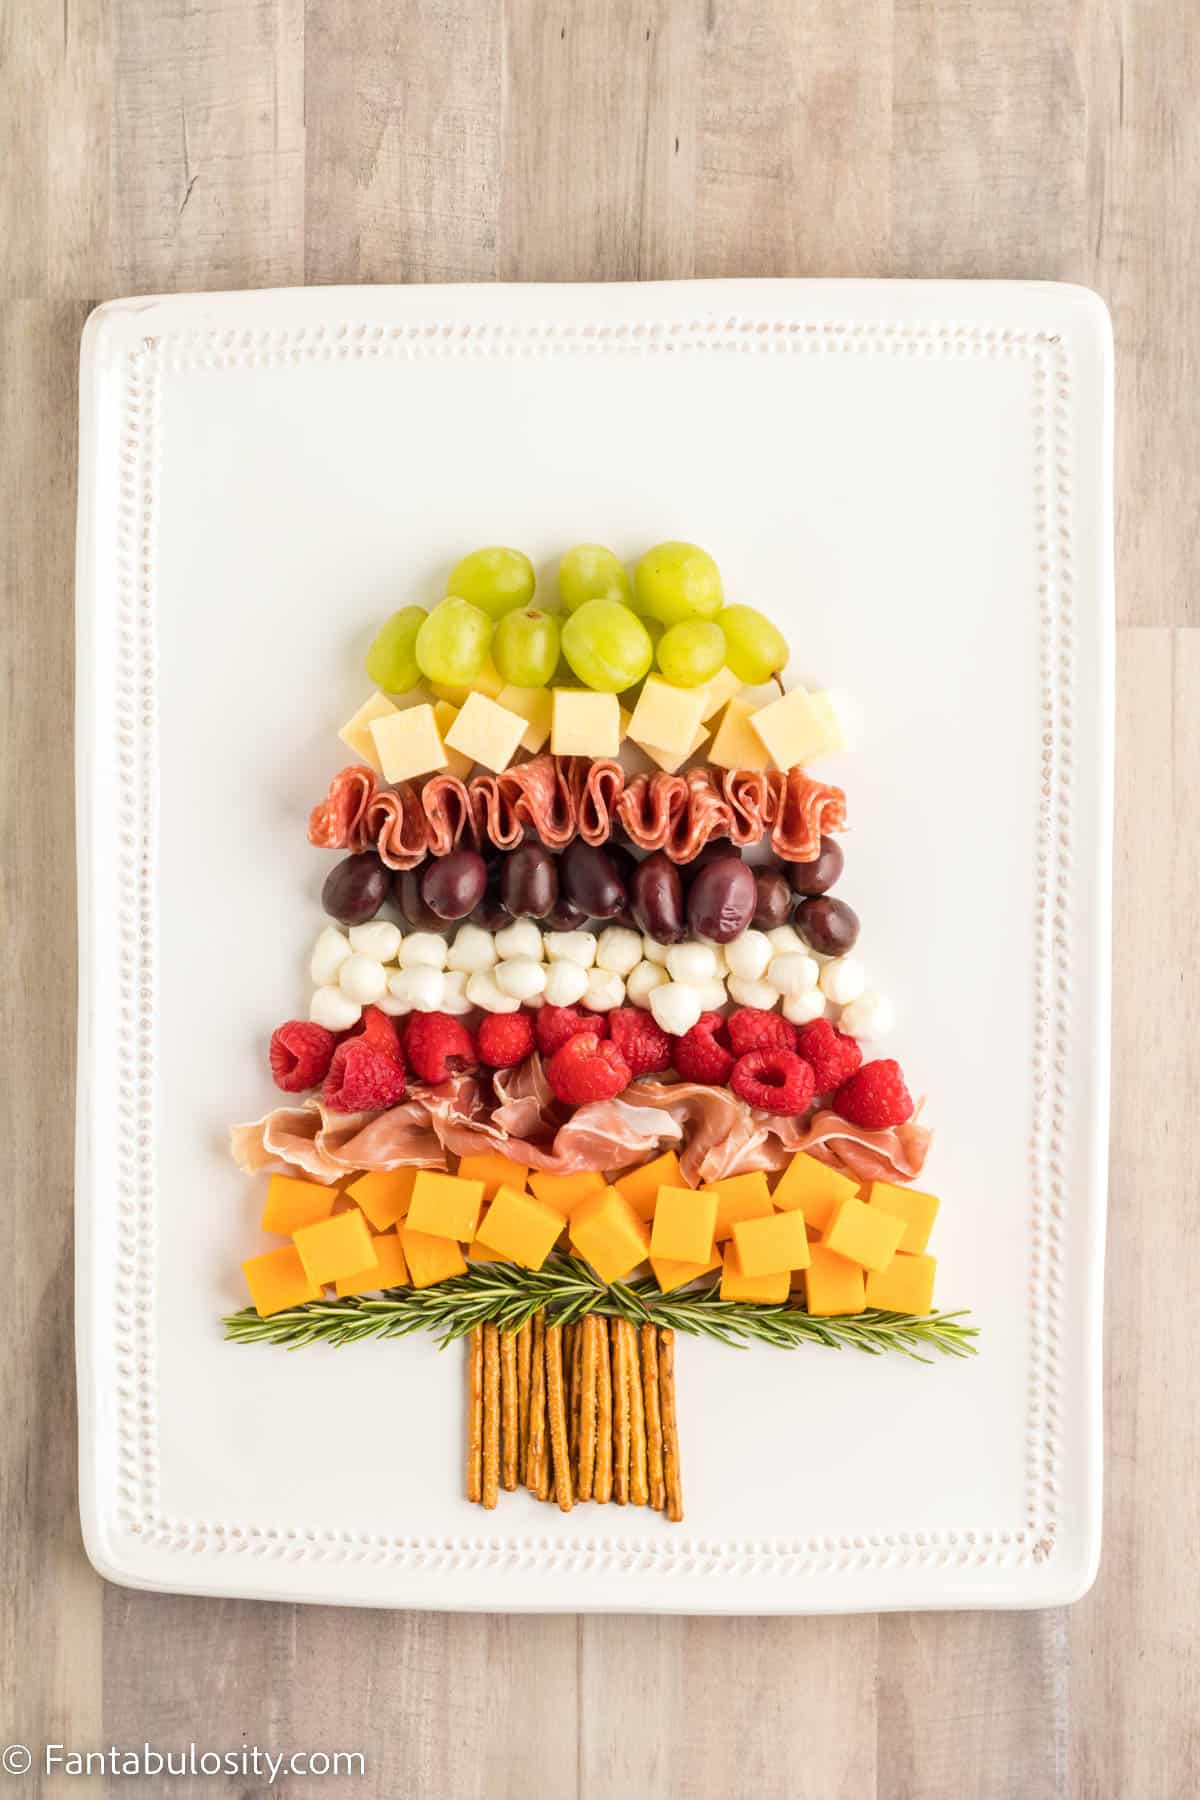 A row of green grapes has been added to continue creating the shape of a Christmas tree on a rectangular white platter